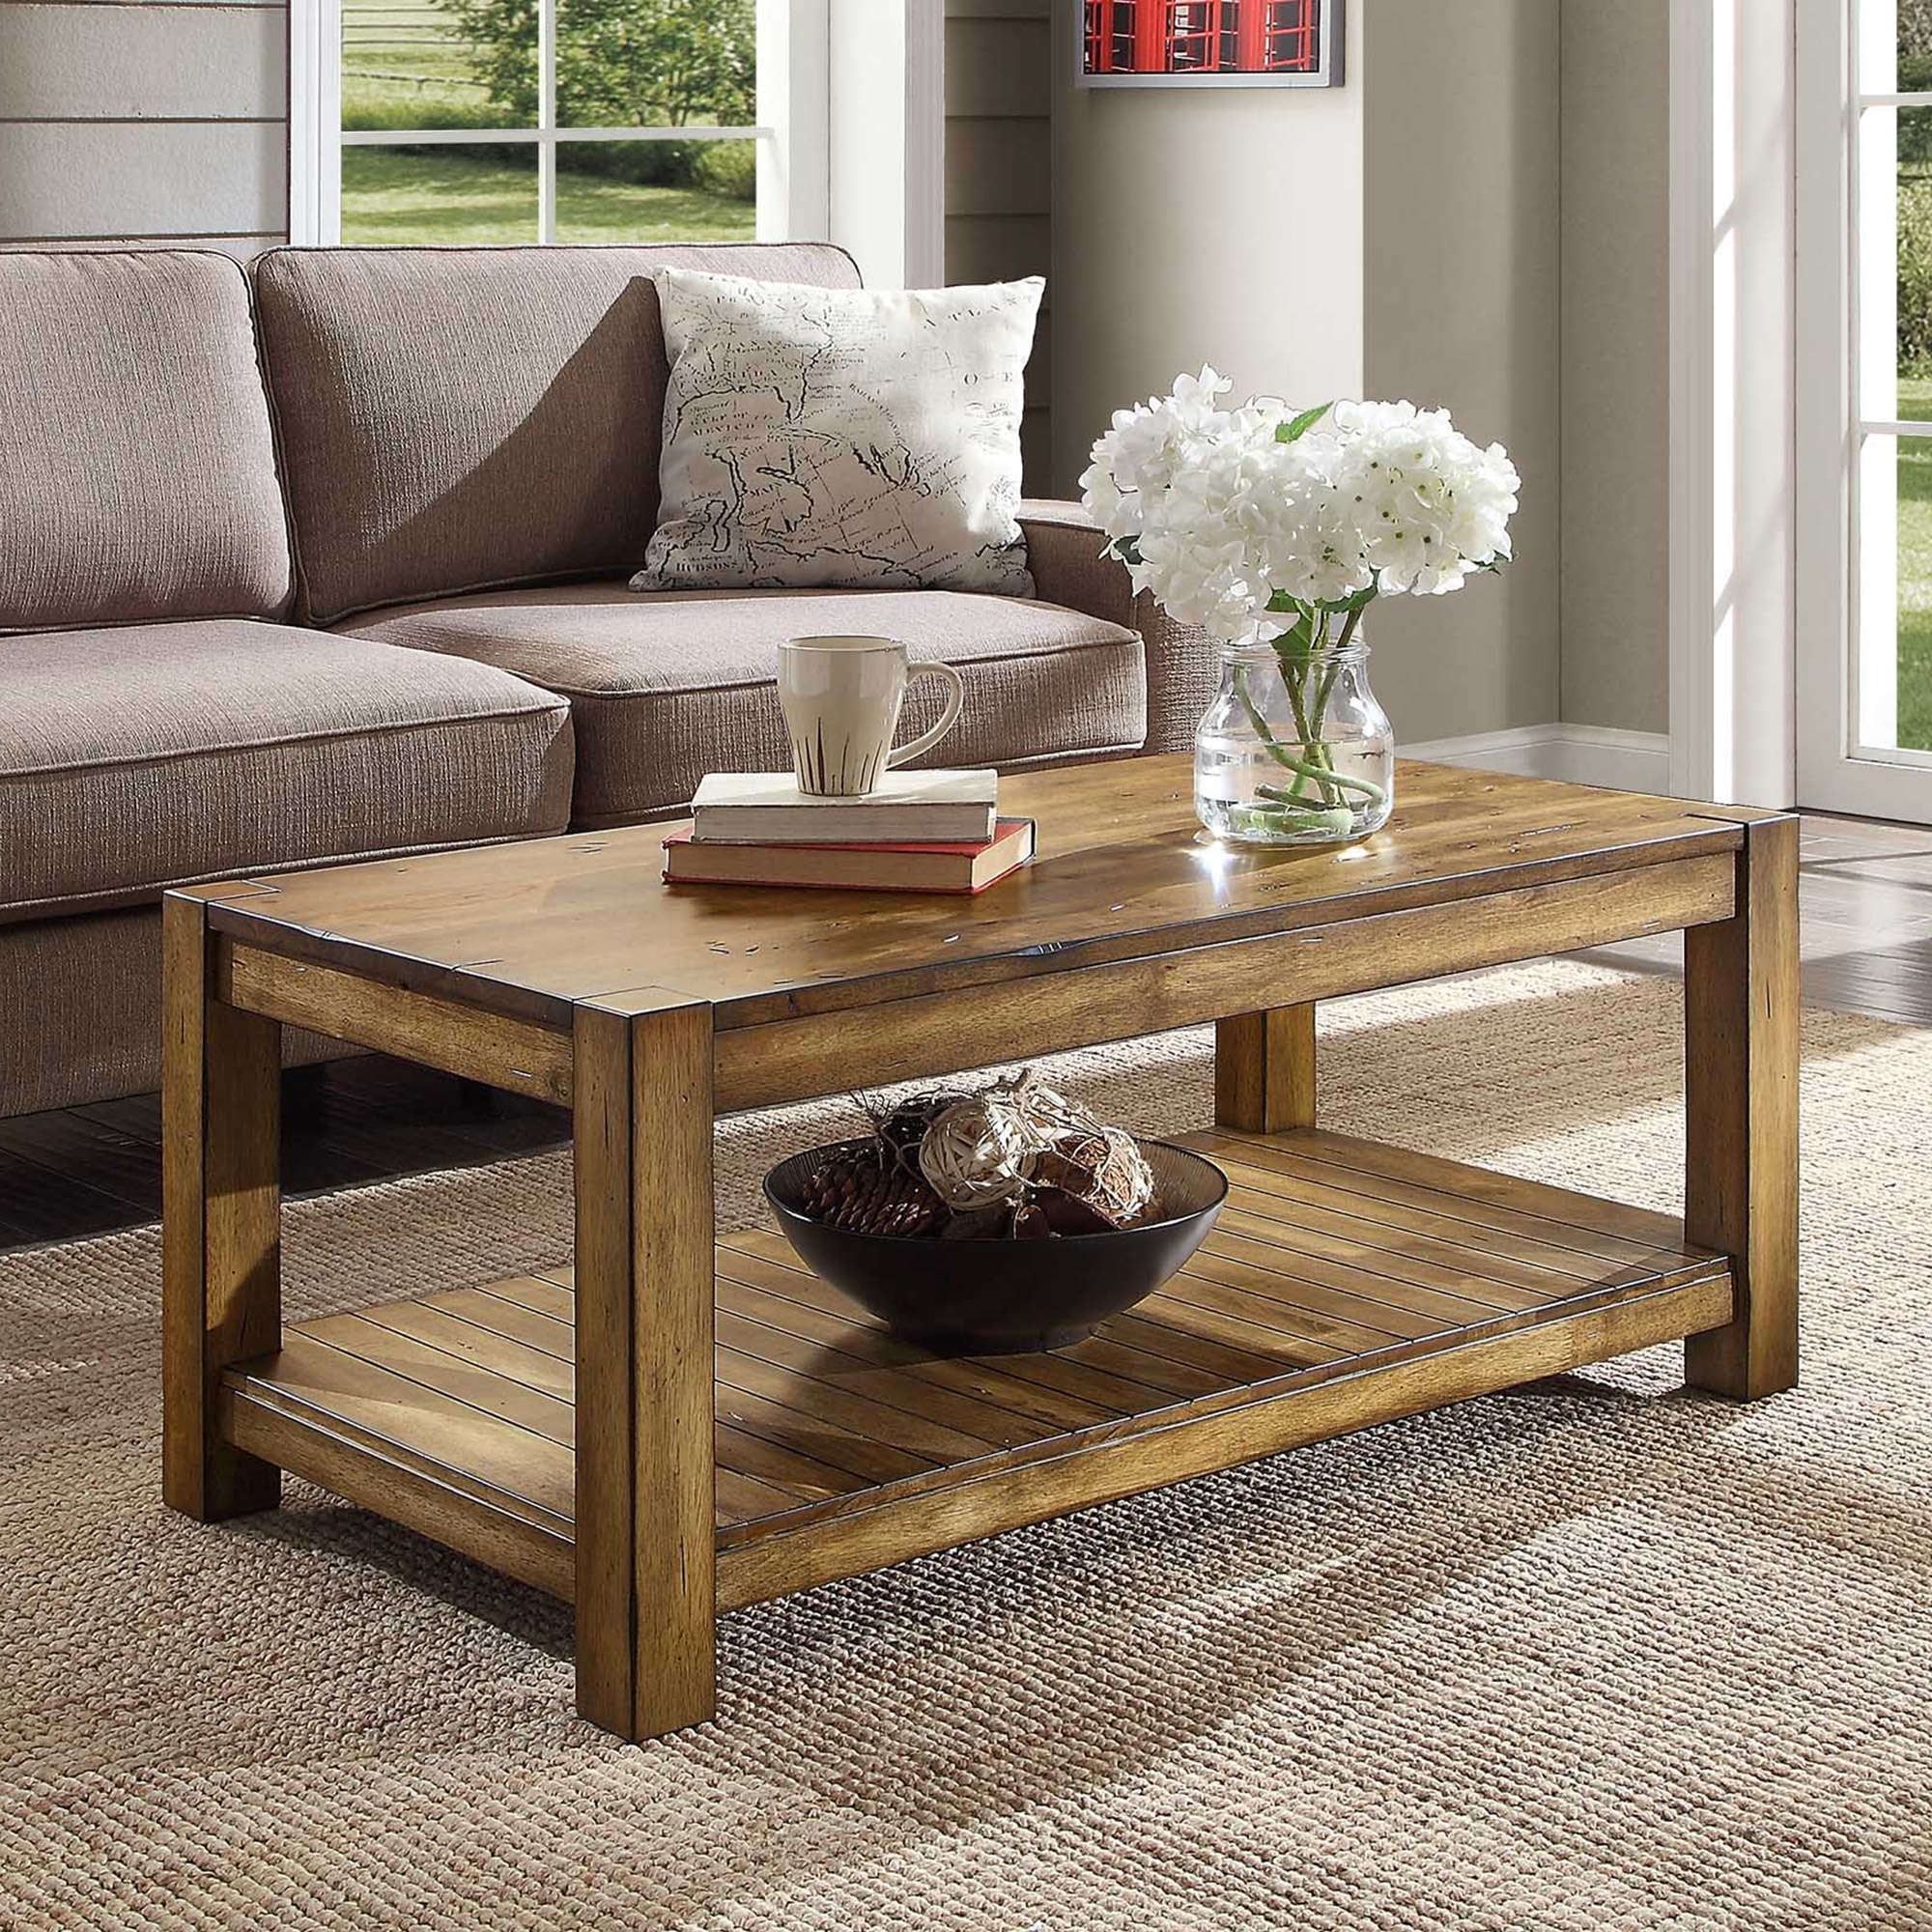 Bryant Solid Wood Coffee Table, Rustic Maple Brown Finish – Walmart Throughout Pemberly Row Replicated Wood Coffee Tables (View 6 of 20)